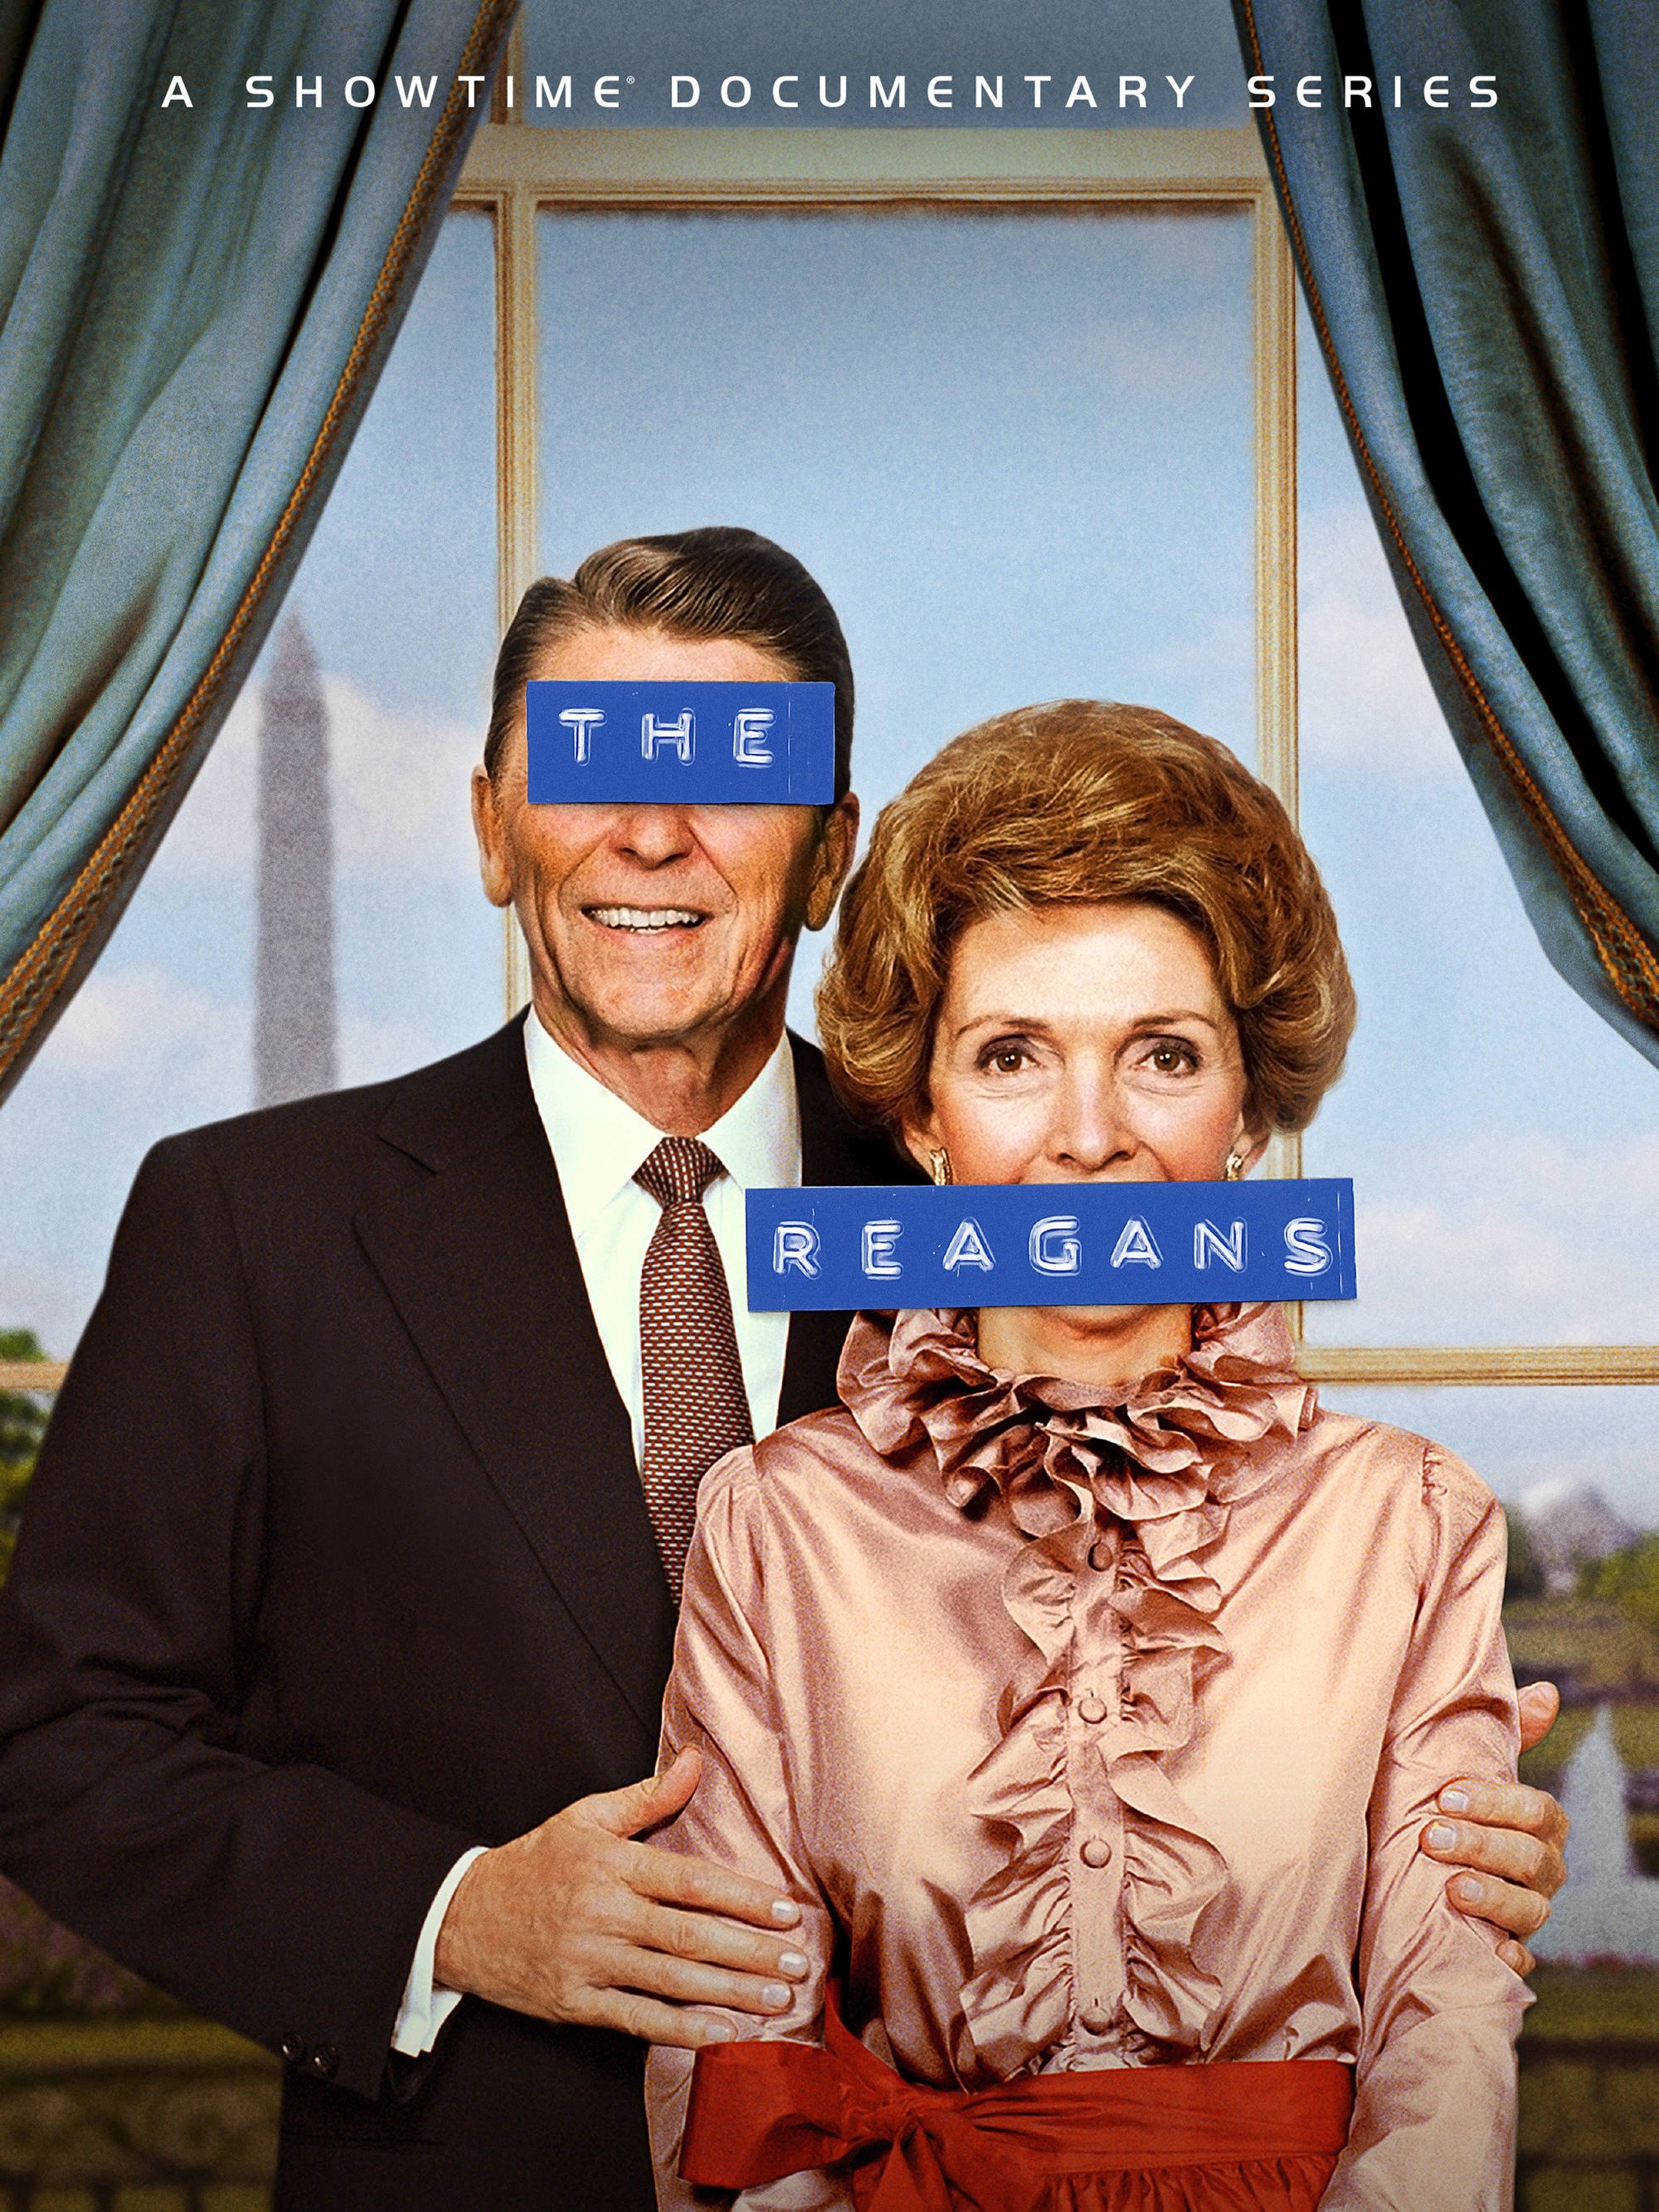 The Reagans on Showtime